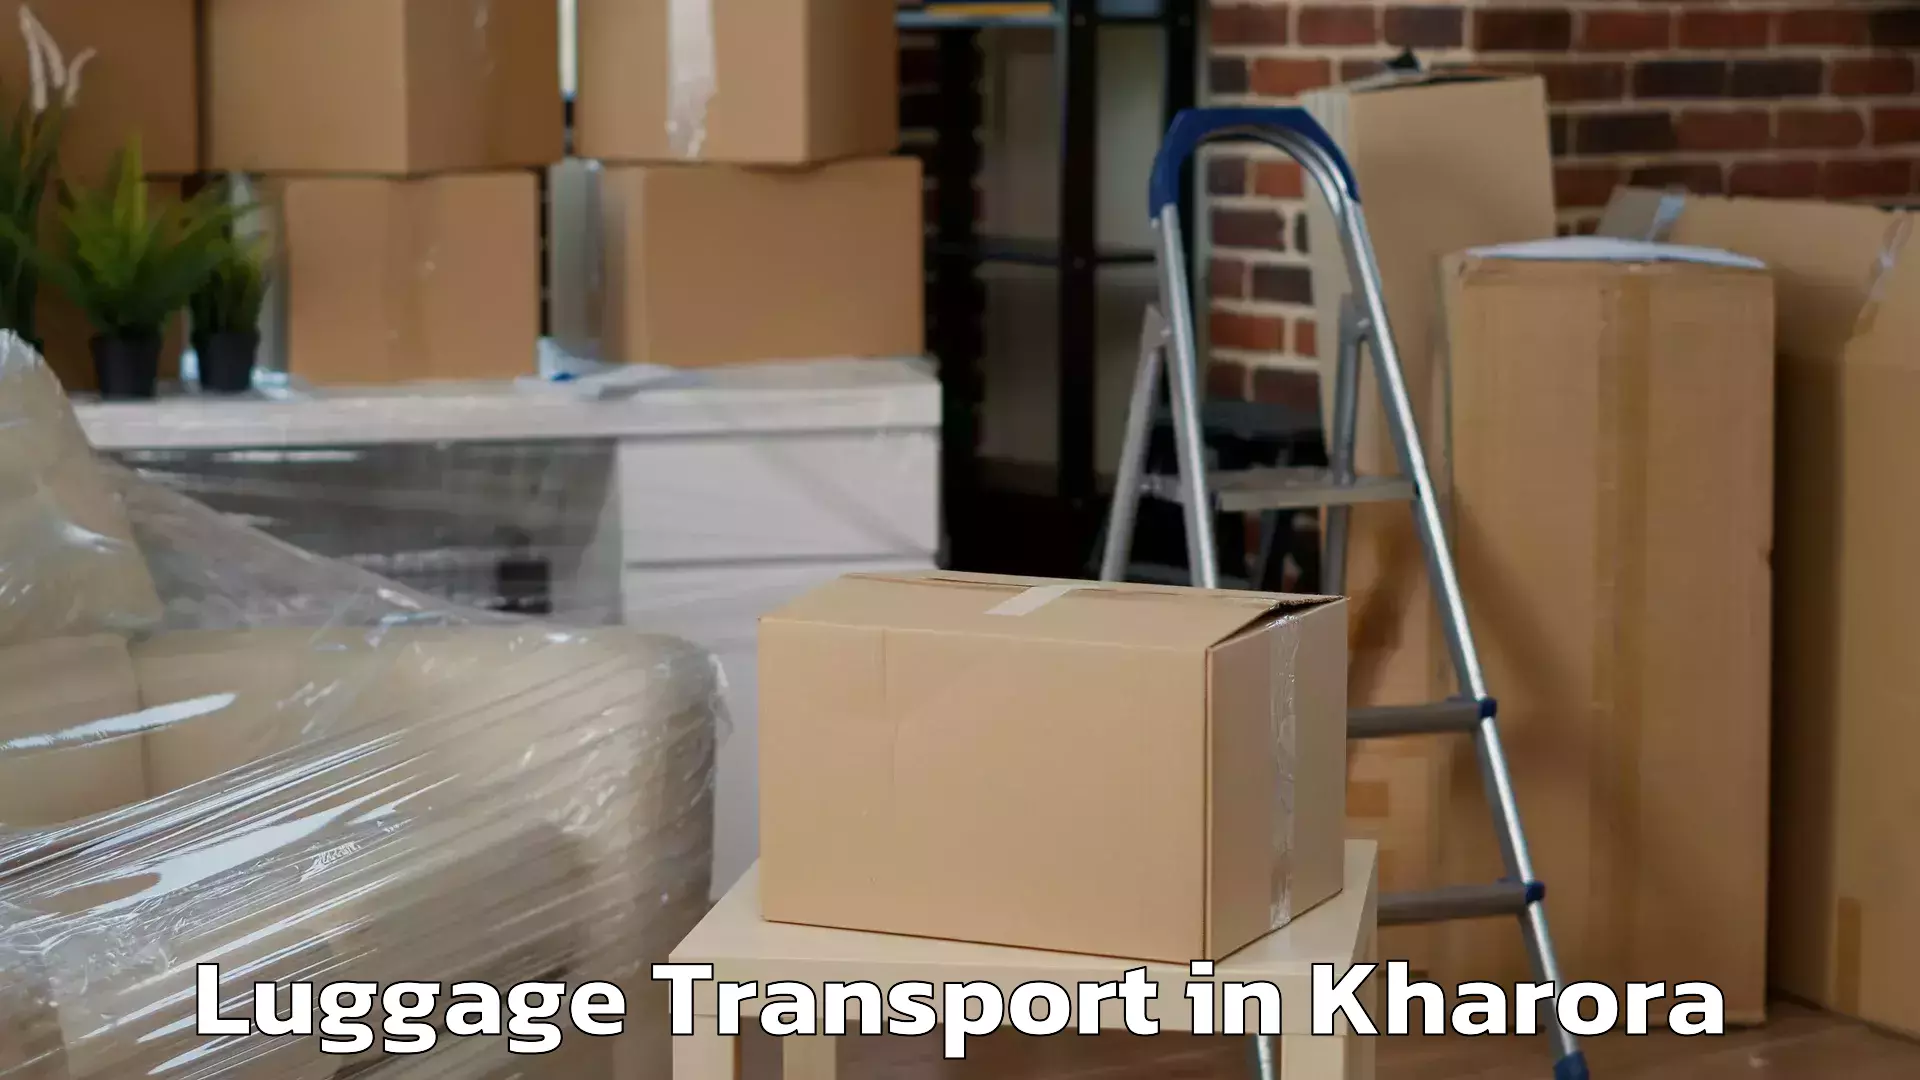 Baggage transport services in Kharora